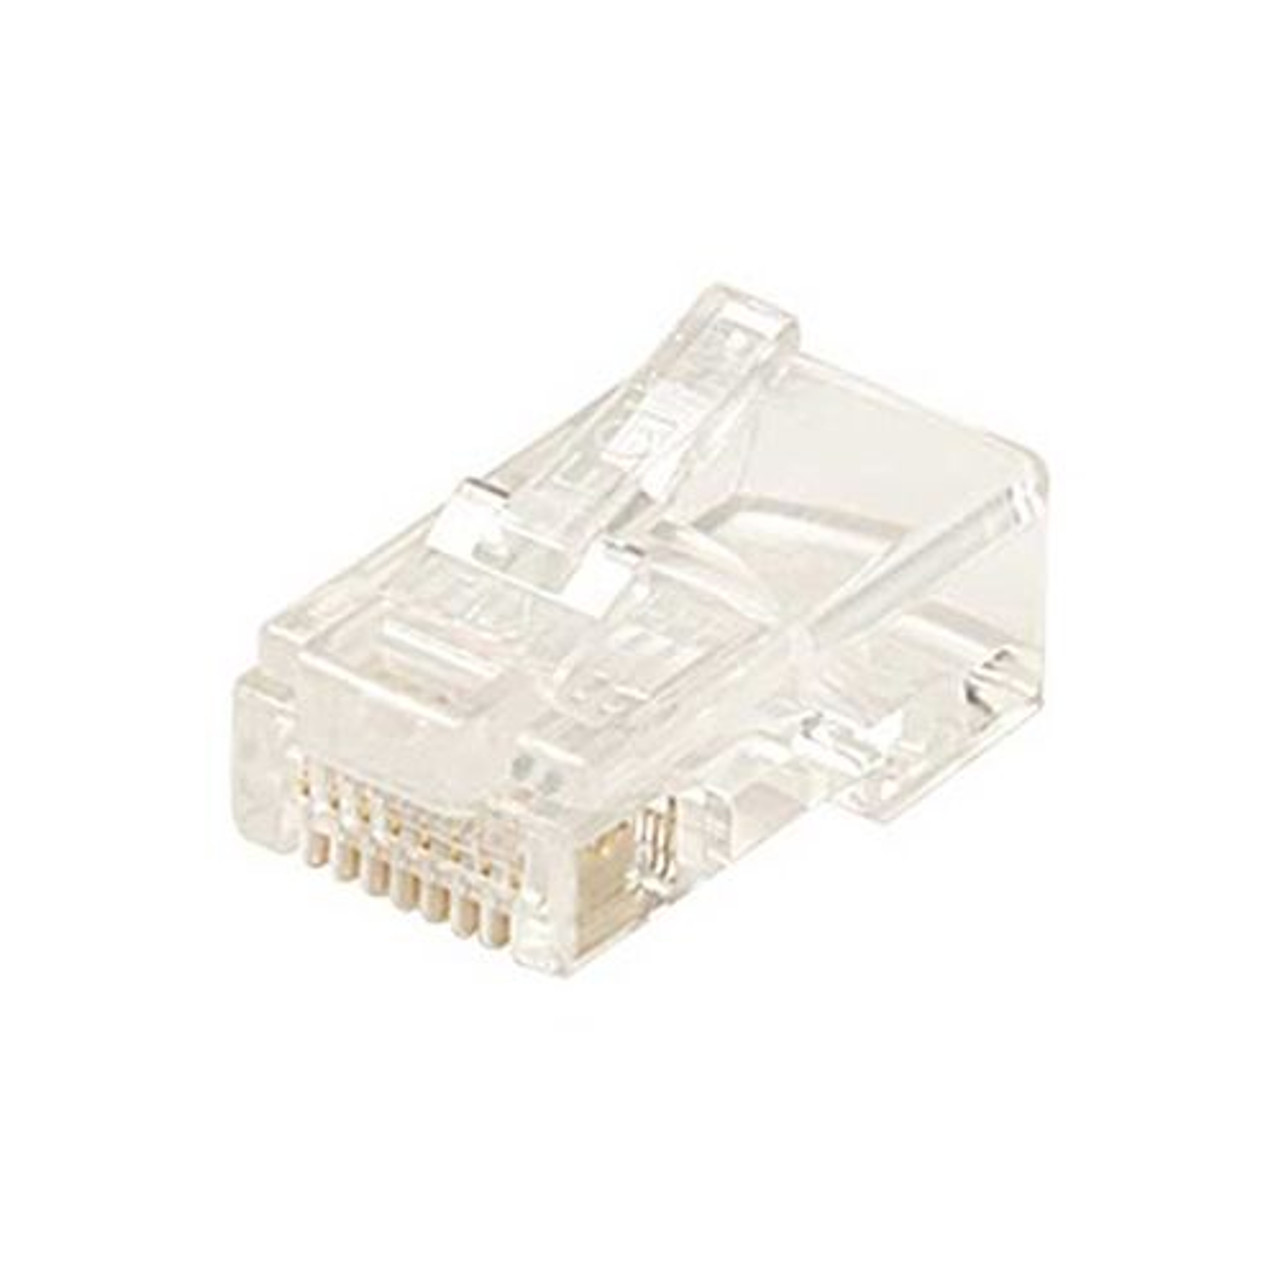 Steren 300-170-25 RJ45 Connector 8 Pin Round Stranded Plug 8X8 Modular Gold Plate 24-26 AWG 6 Micron 8P8C Male Modular RJ-45 Plug Connector 25 Pack Network Connector Data Telephone Line Plugs